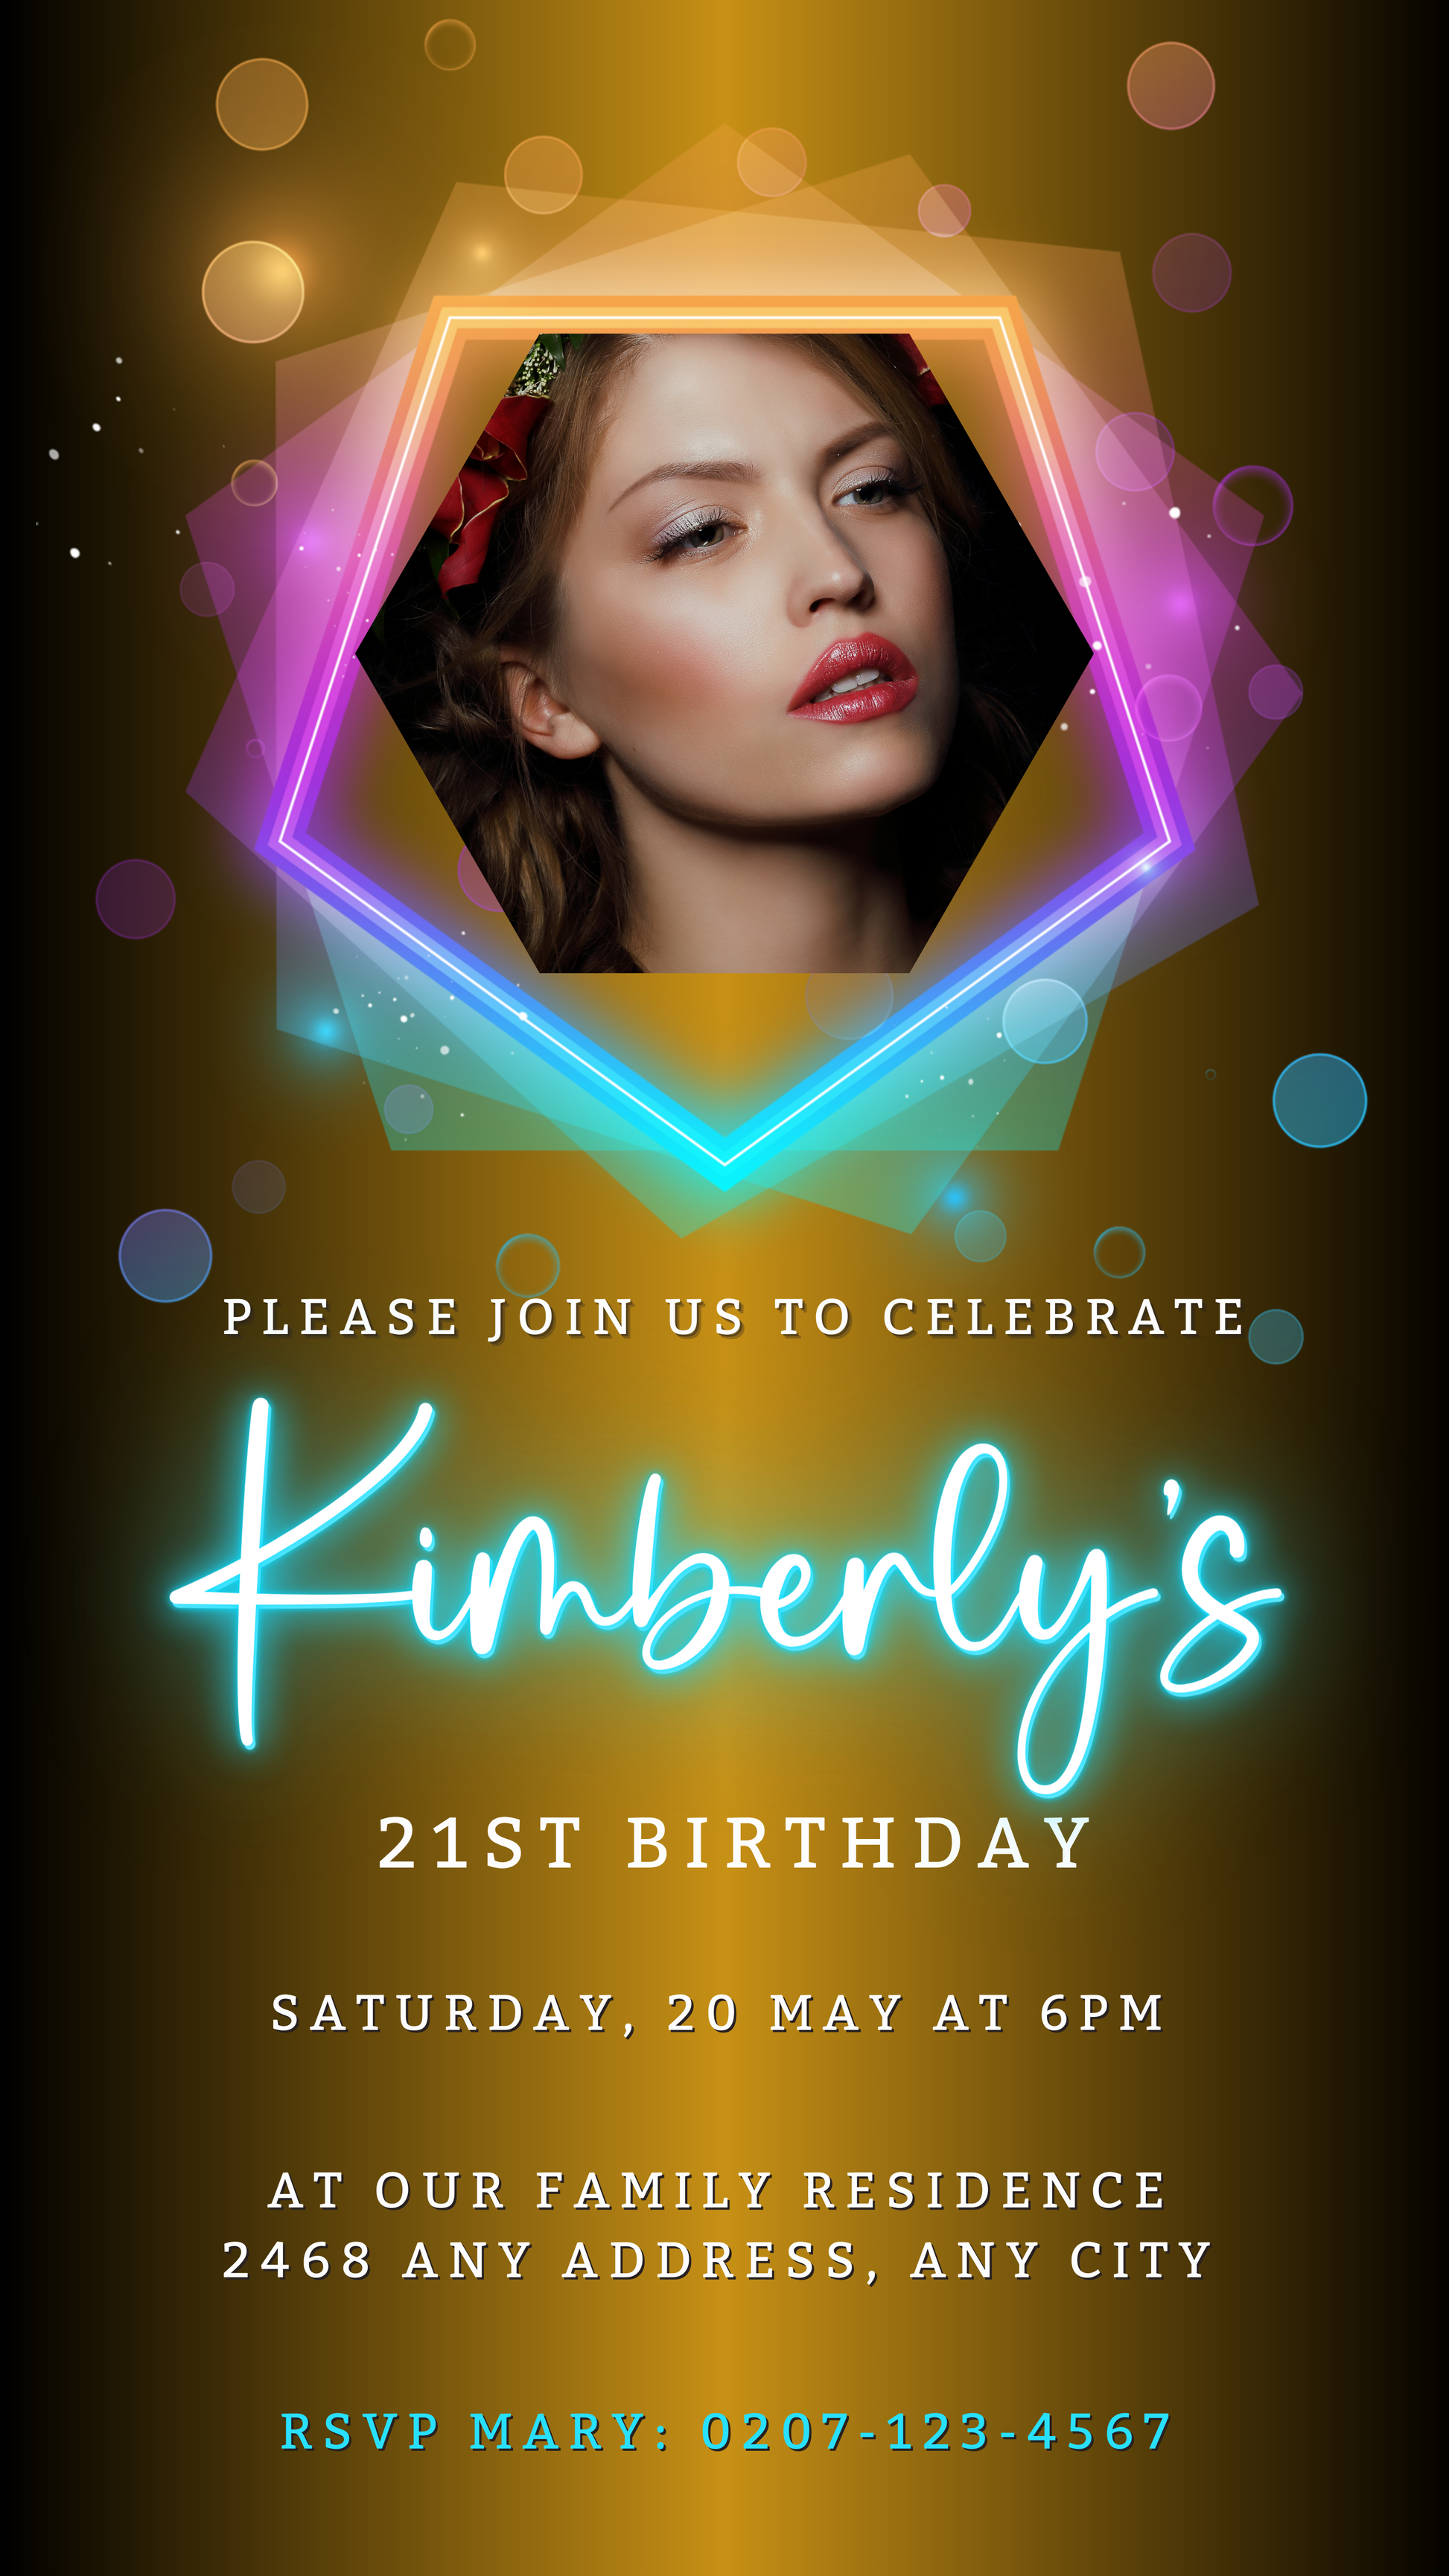 Customisable Digital Gold Pink Teal Neon Evite featuring a woman's face with bright lights, designed for easy personalisation via Canva for birthday parties.